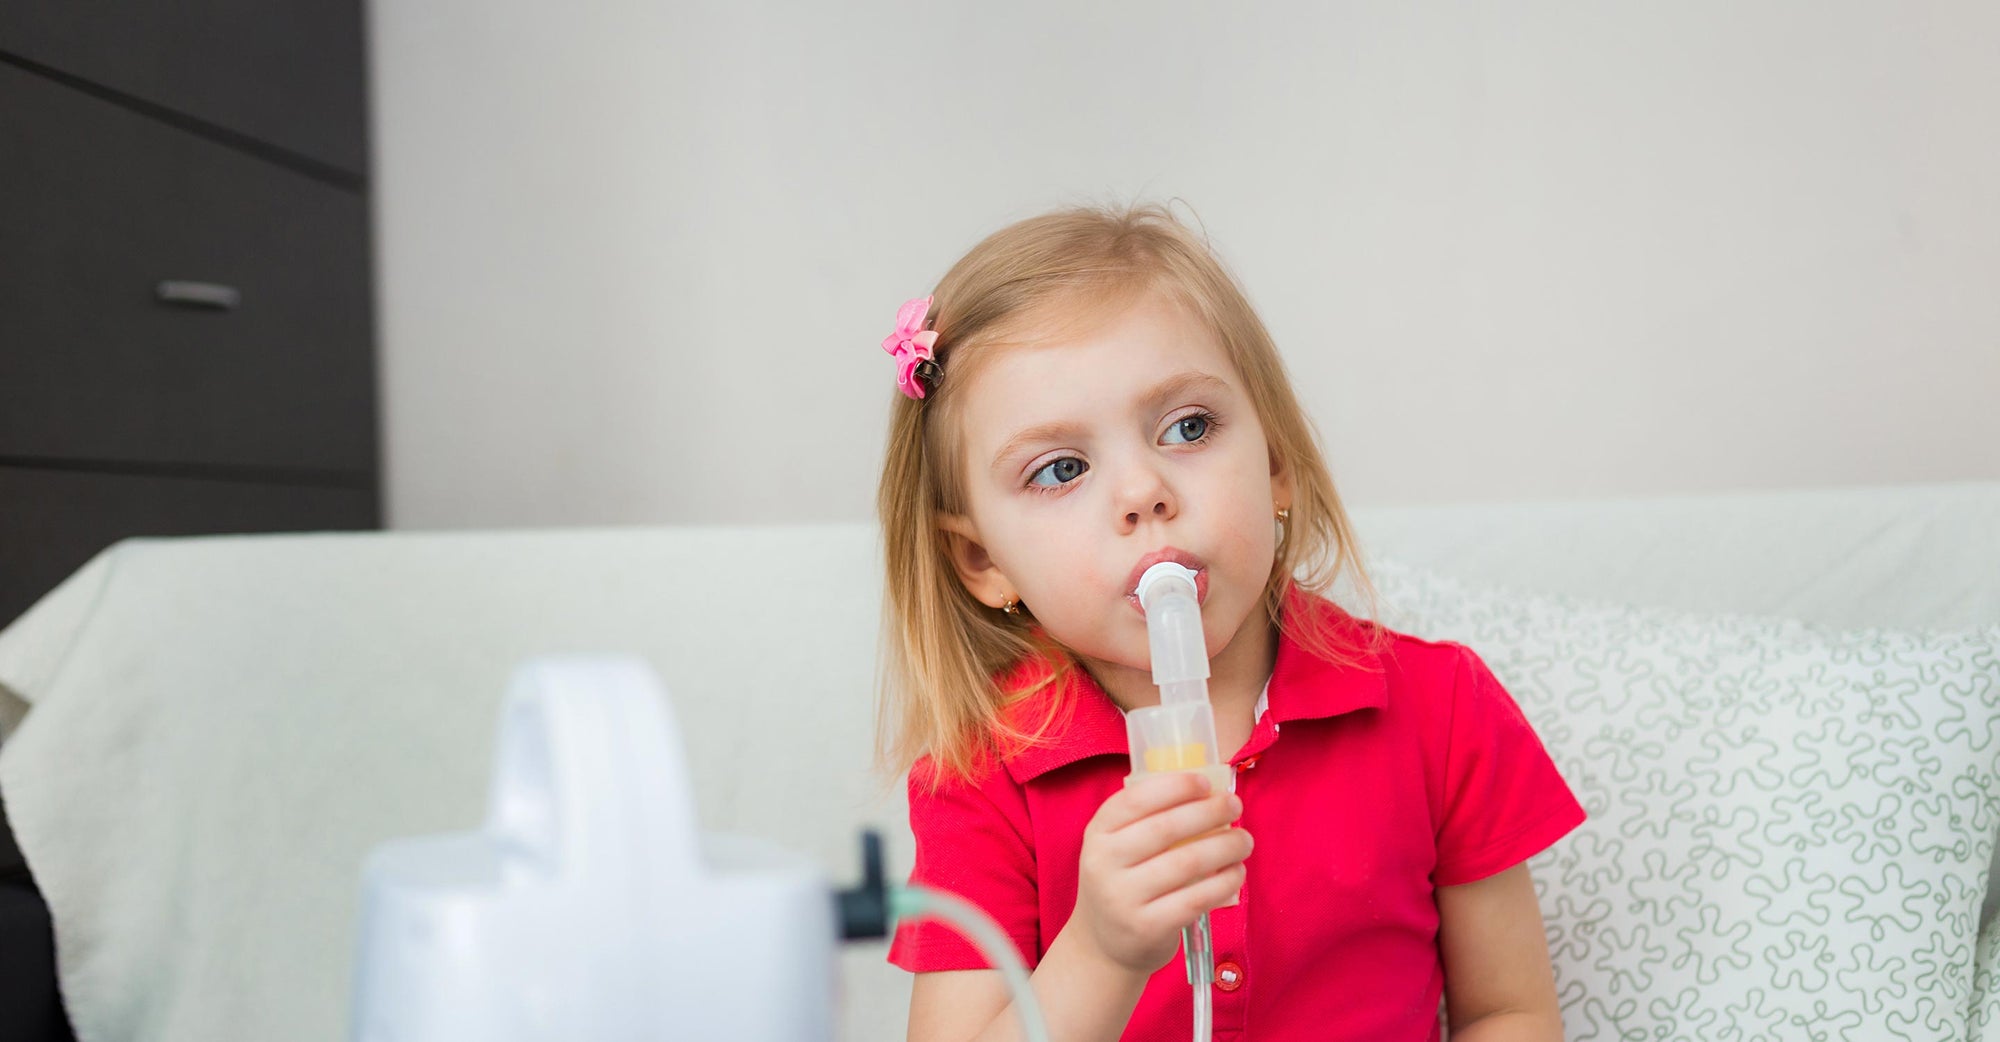 NOx linked to bronchitis in kids; Can air purifiers help?